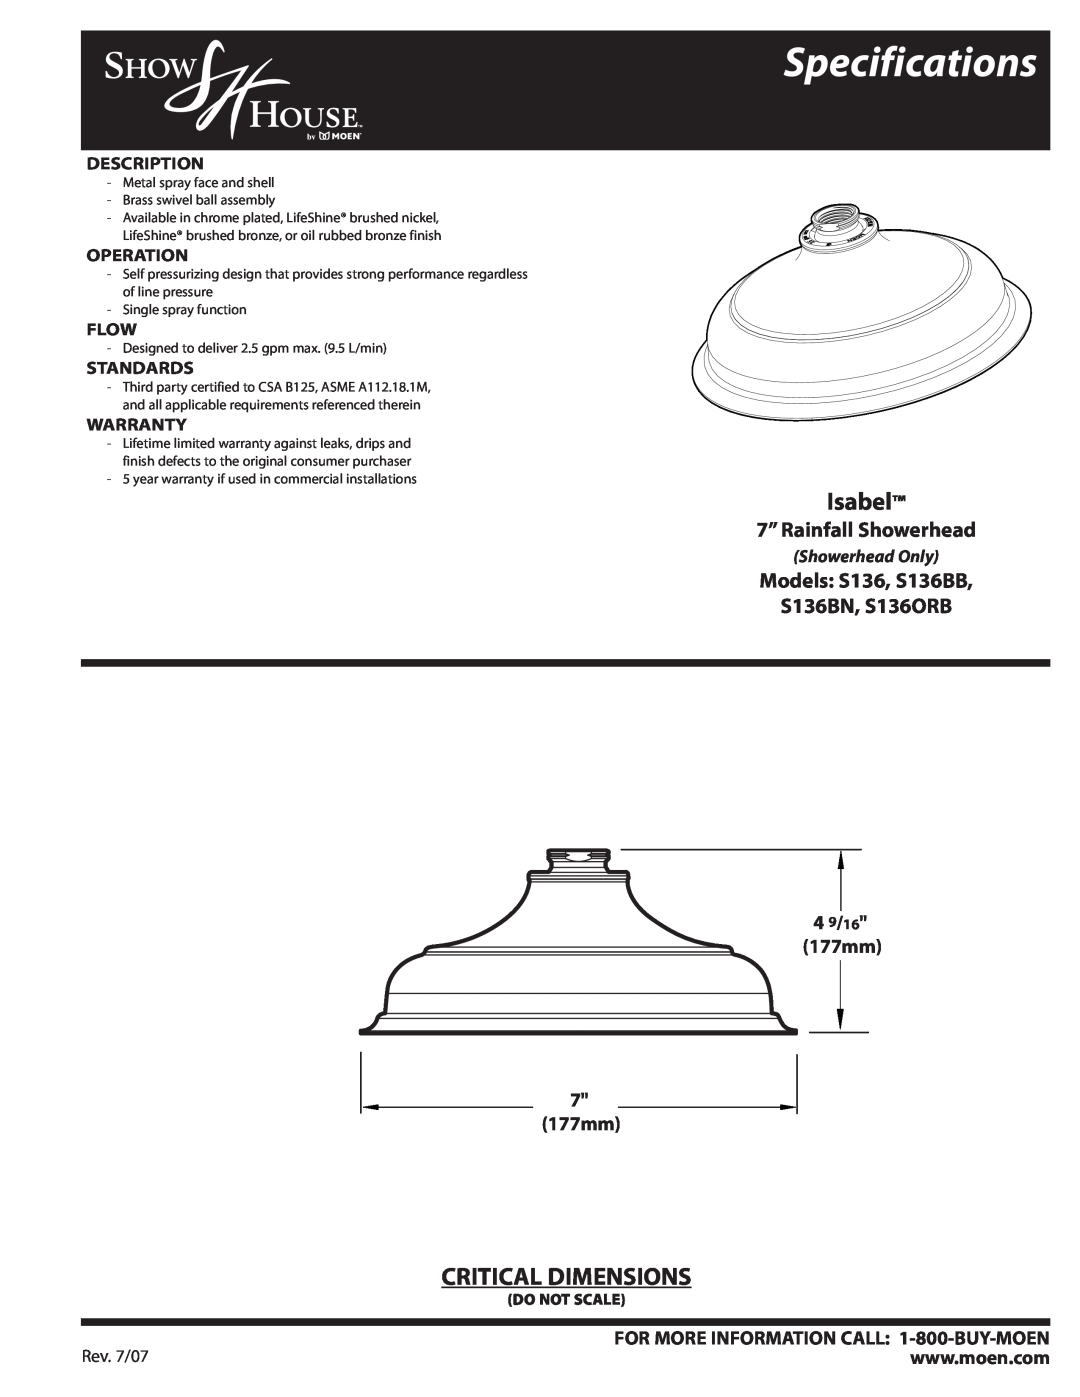 Moen S136BB specifications Specifications, Isabel, Critical Dimensions, 7” Rainfall Showerhead, 4 9/16 177mm, Description 